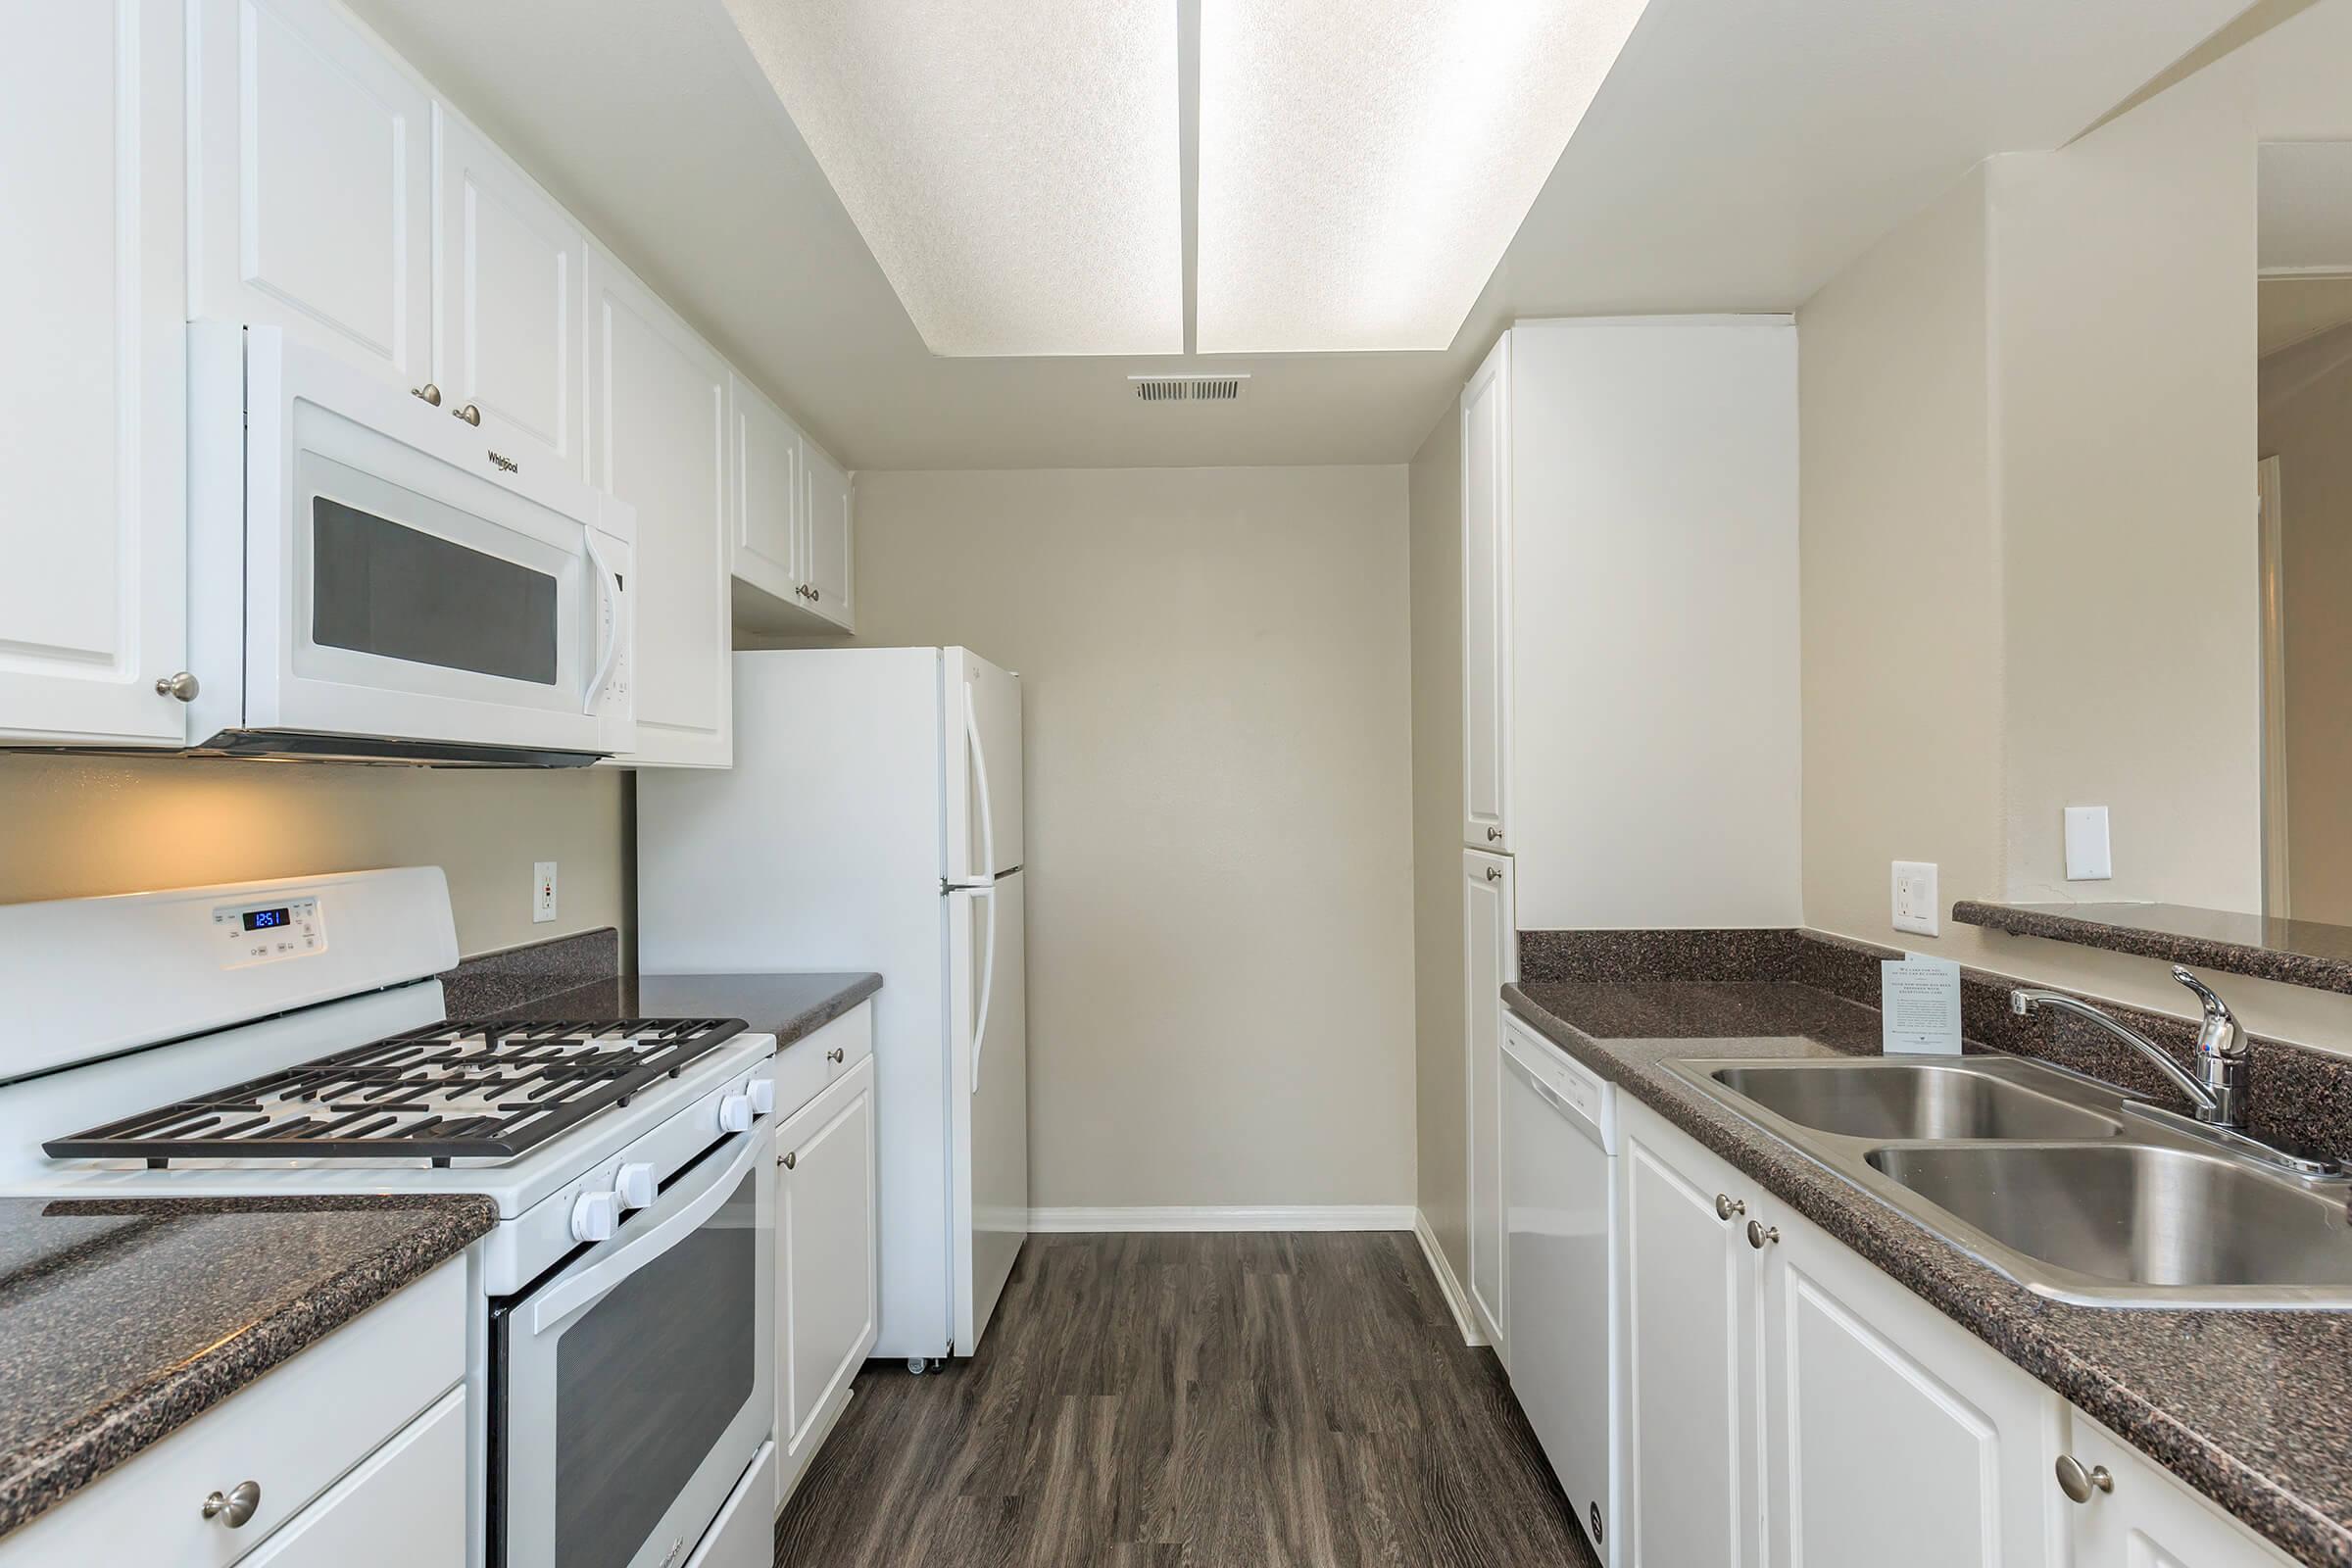 Laurel Terrace Apartment Homes provides a fully-equipped kitchen